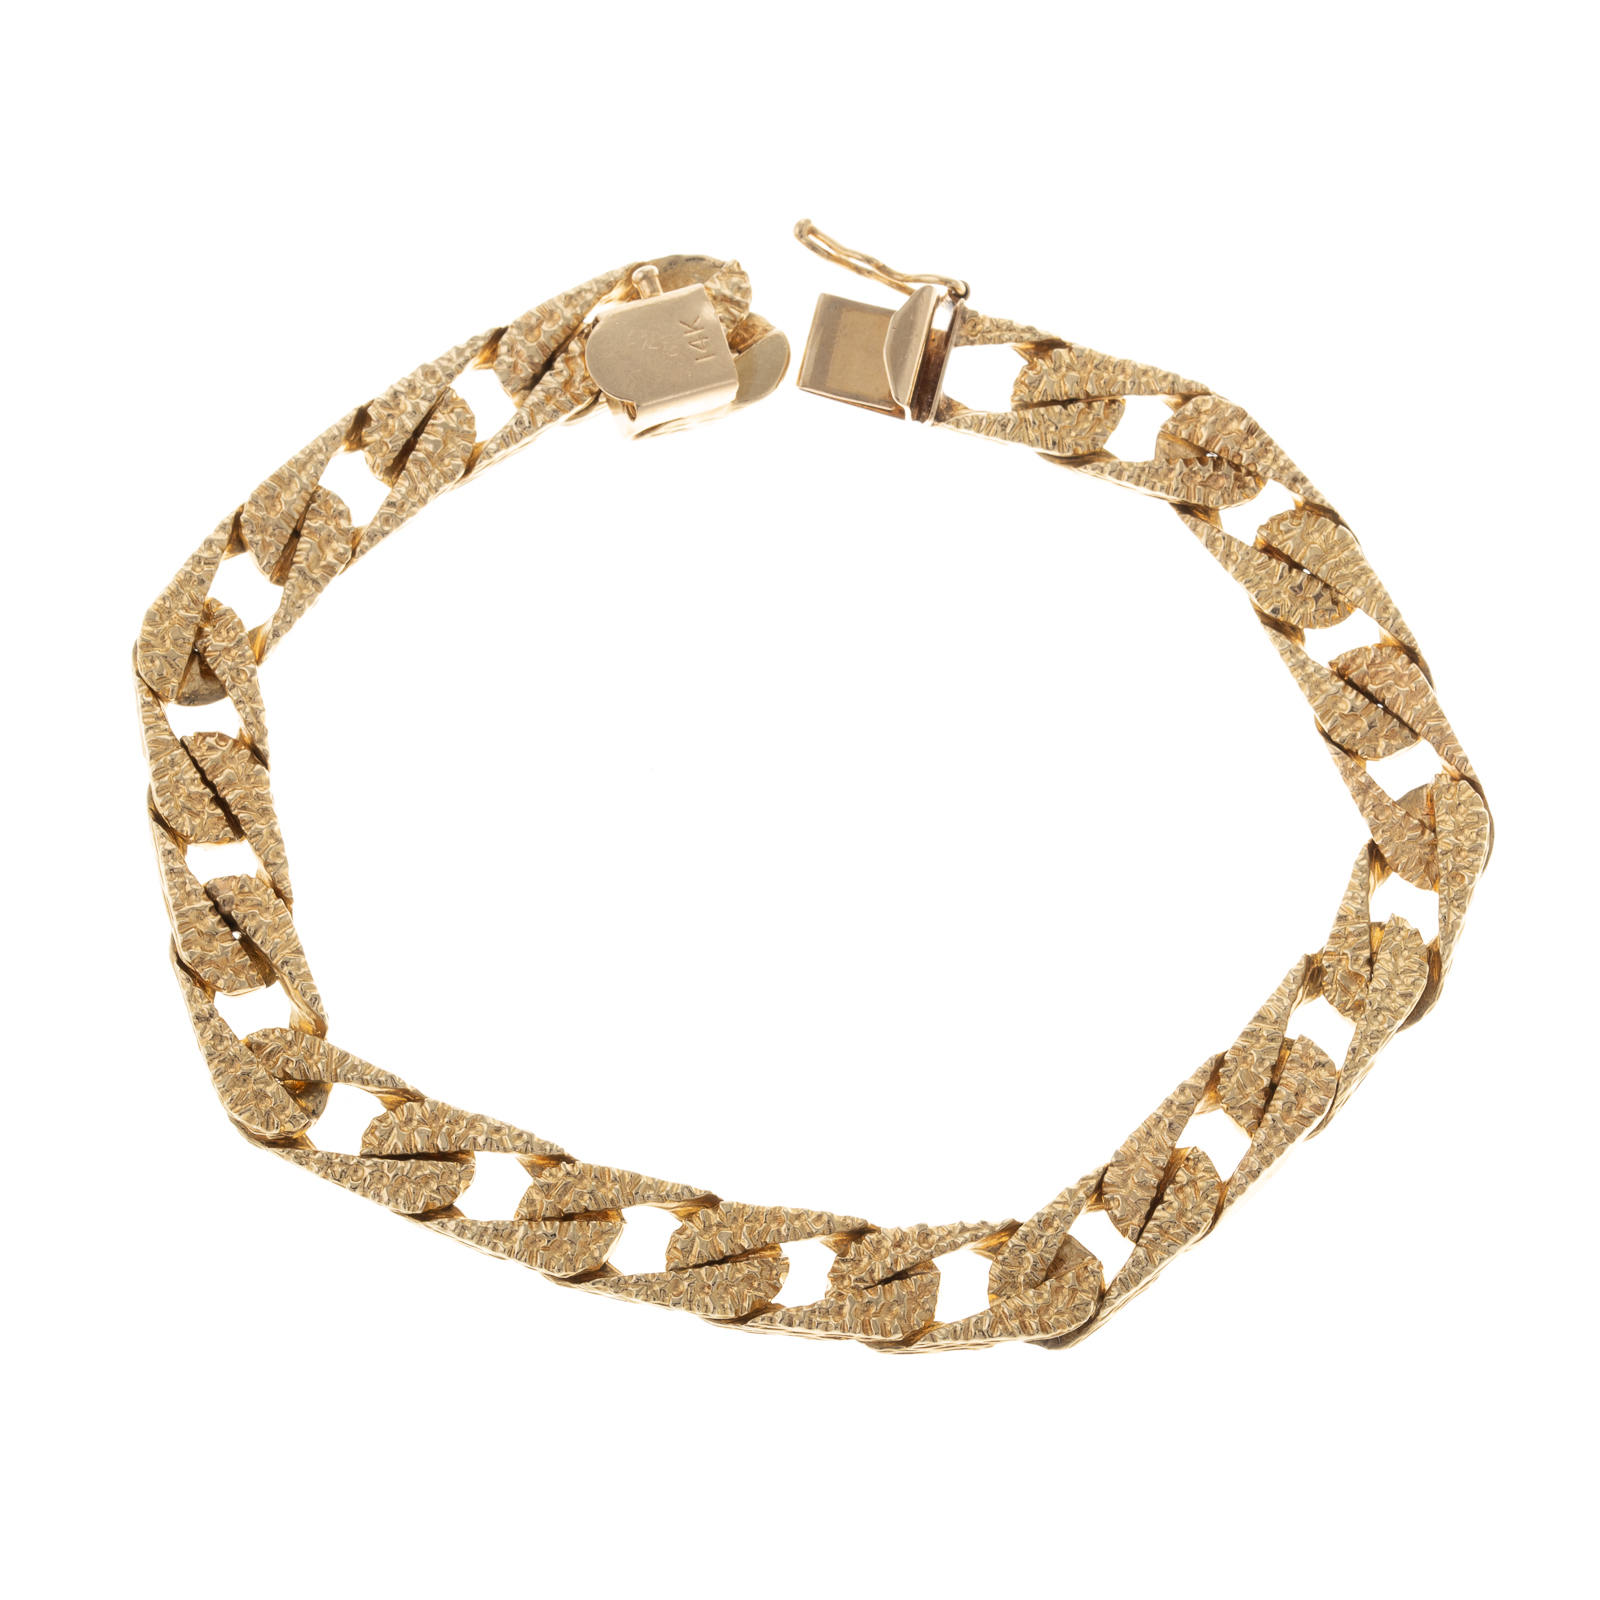 A TEXTURED CURB LINK BRACELET IN 29dfdf